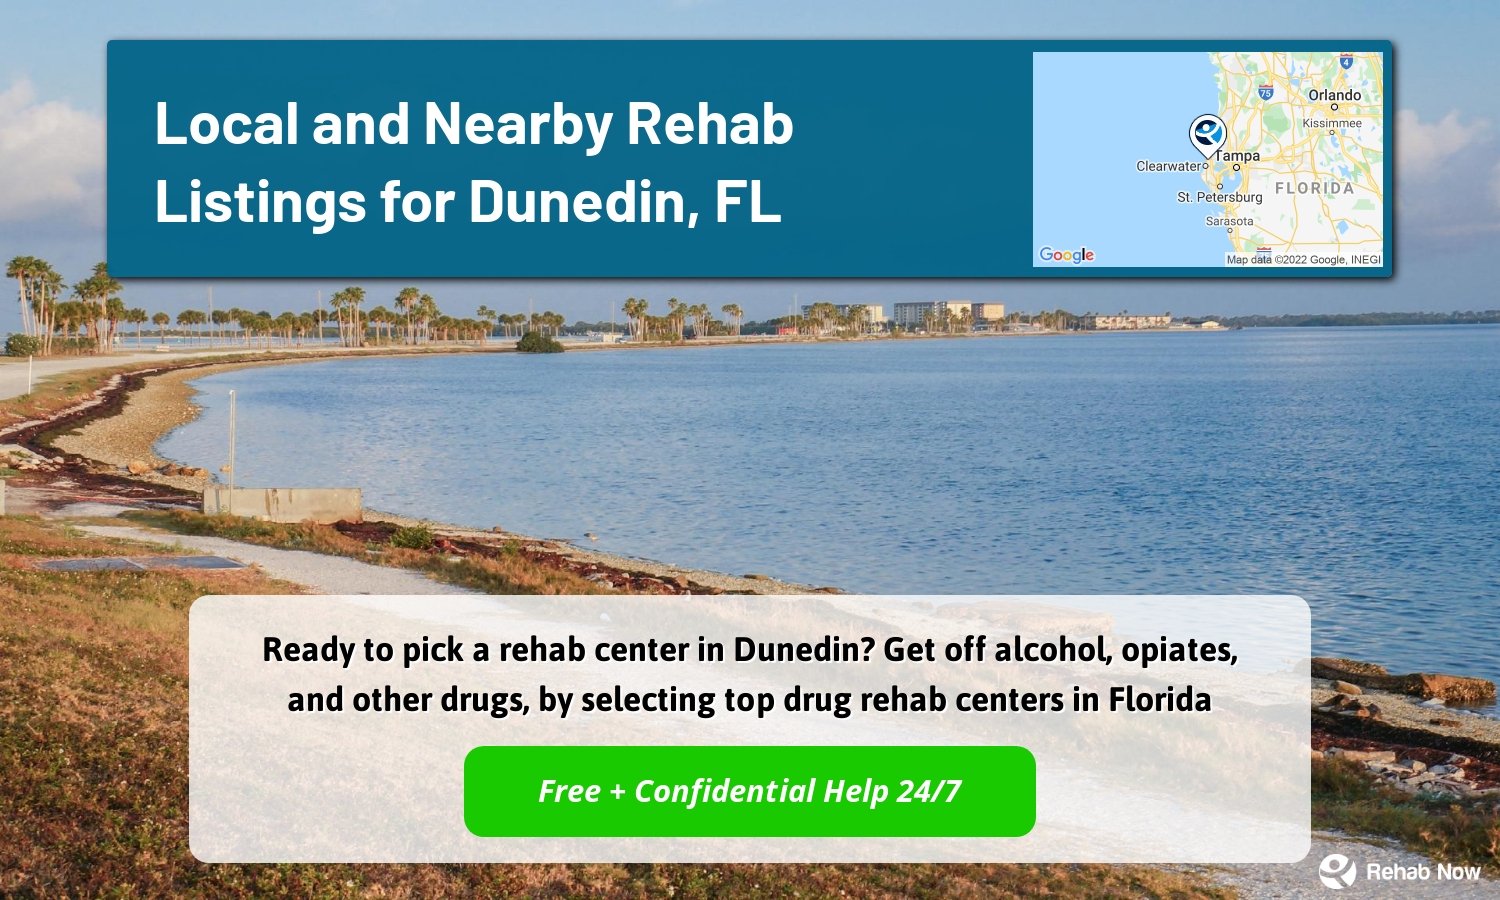 Ready to pick a rehab center in Dunedin? Get off alcohol, opiates, and other drugs, by selecting top drug rehab centers in Florida